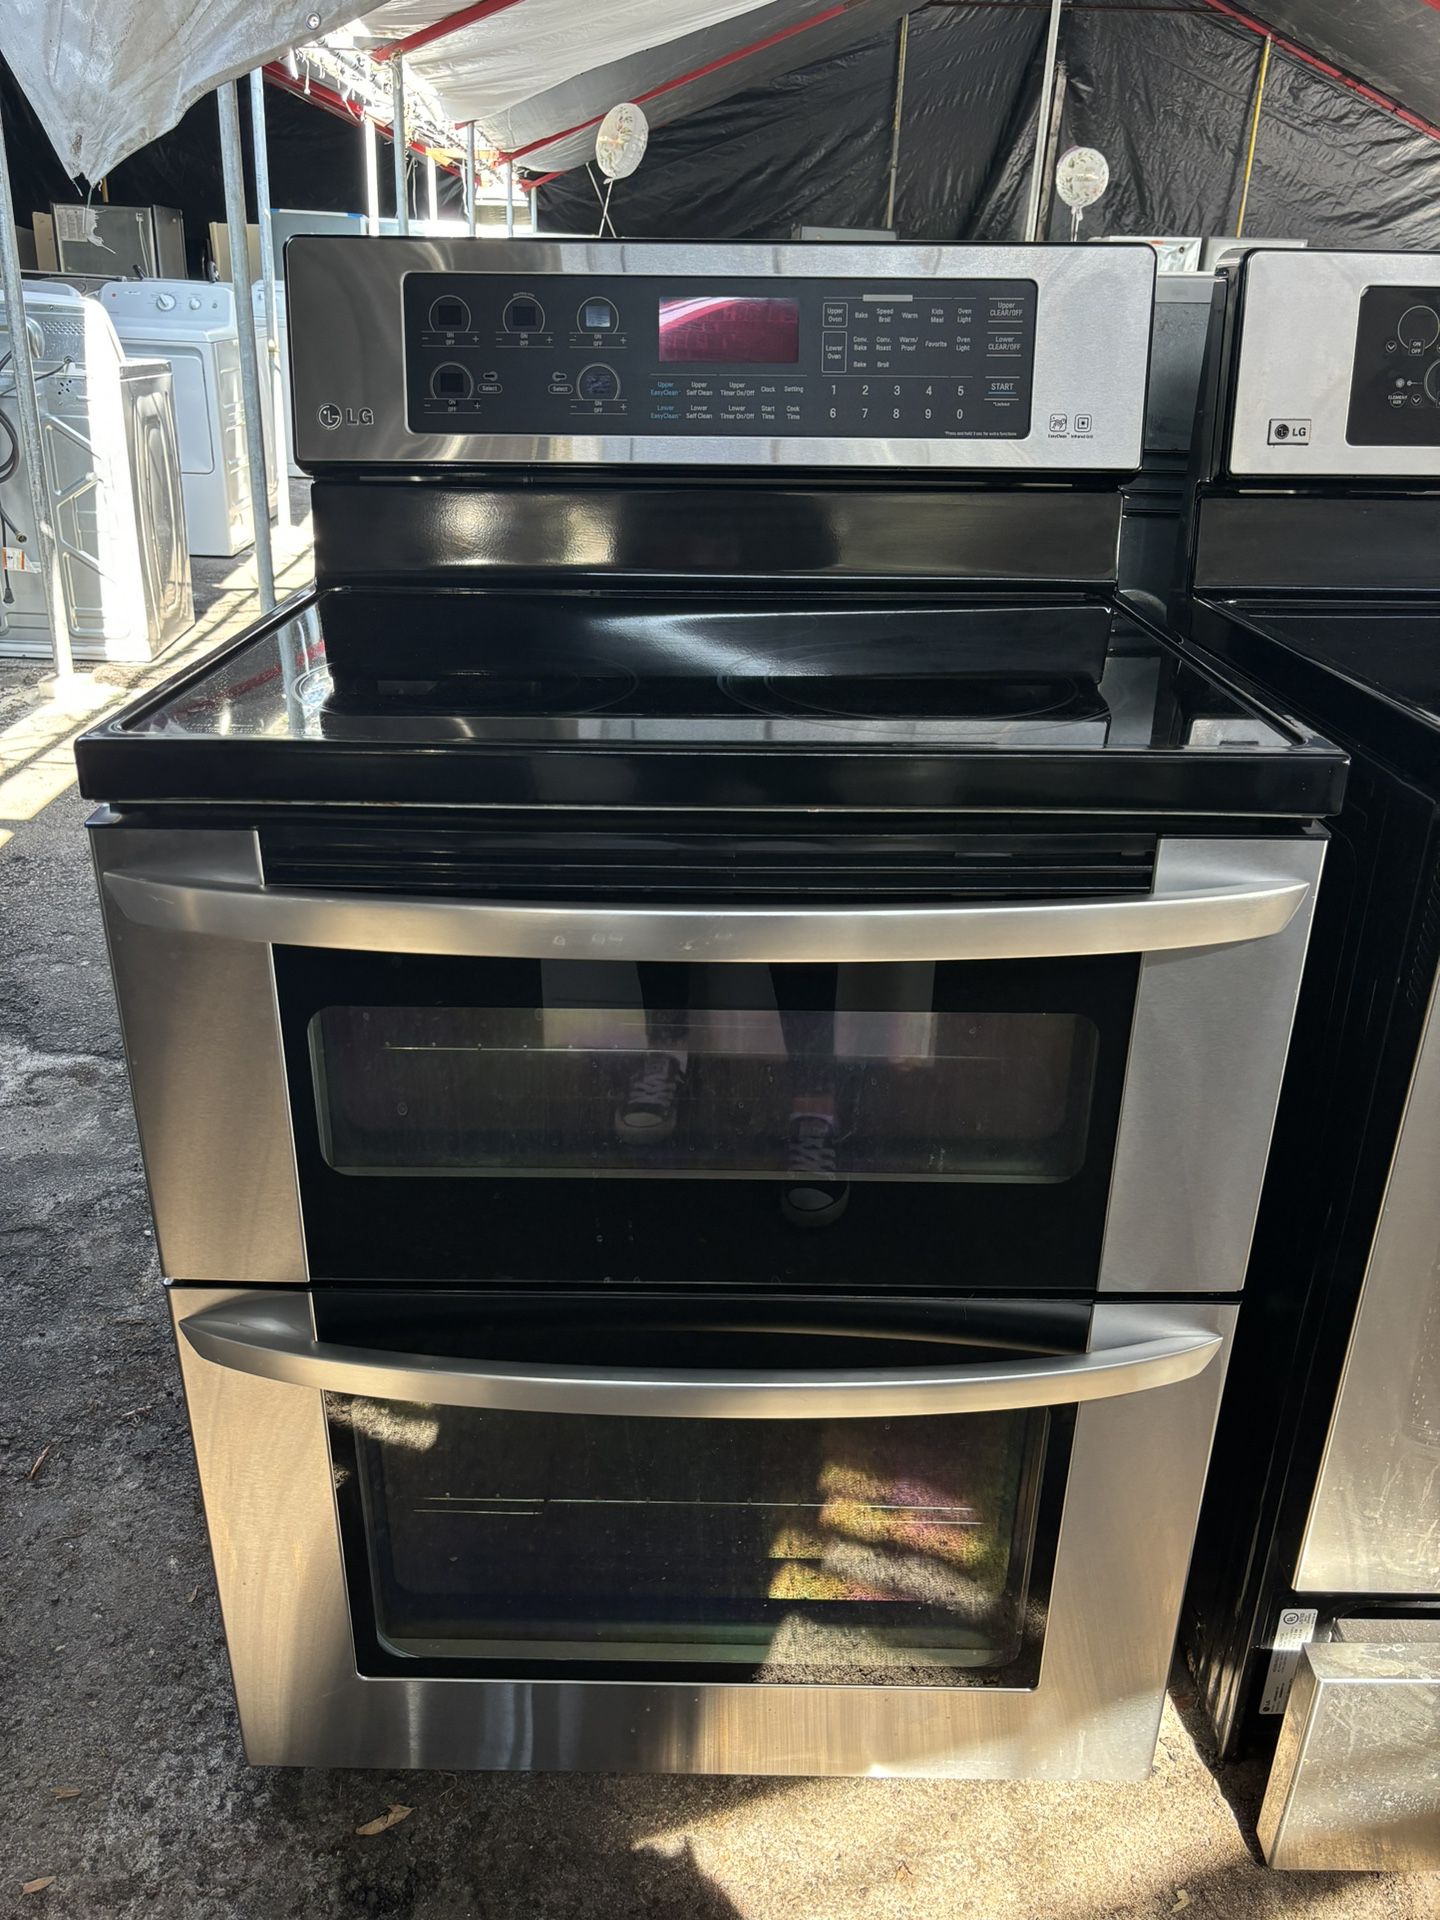 LG DoubleOven Glasstop Convection Stove